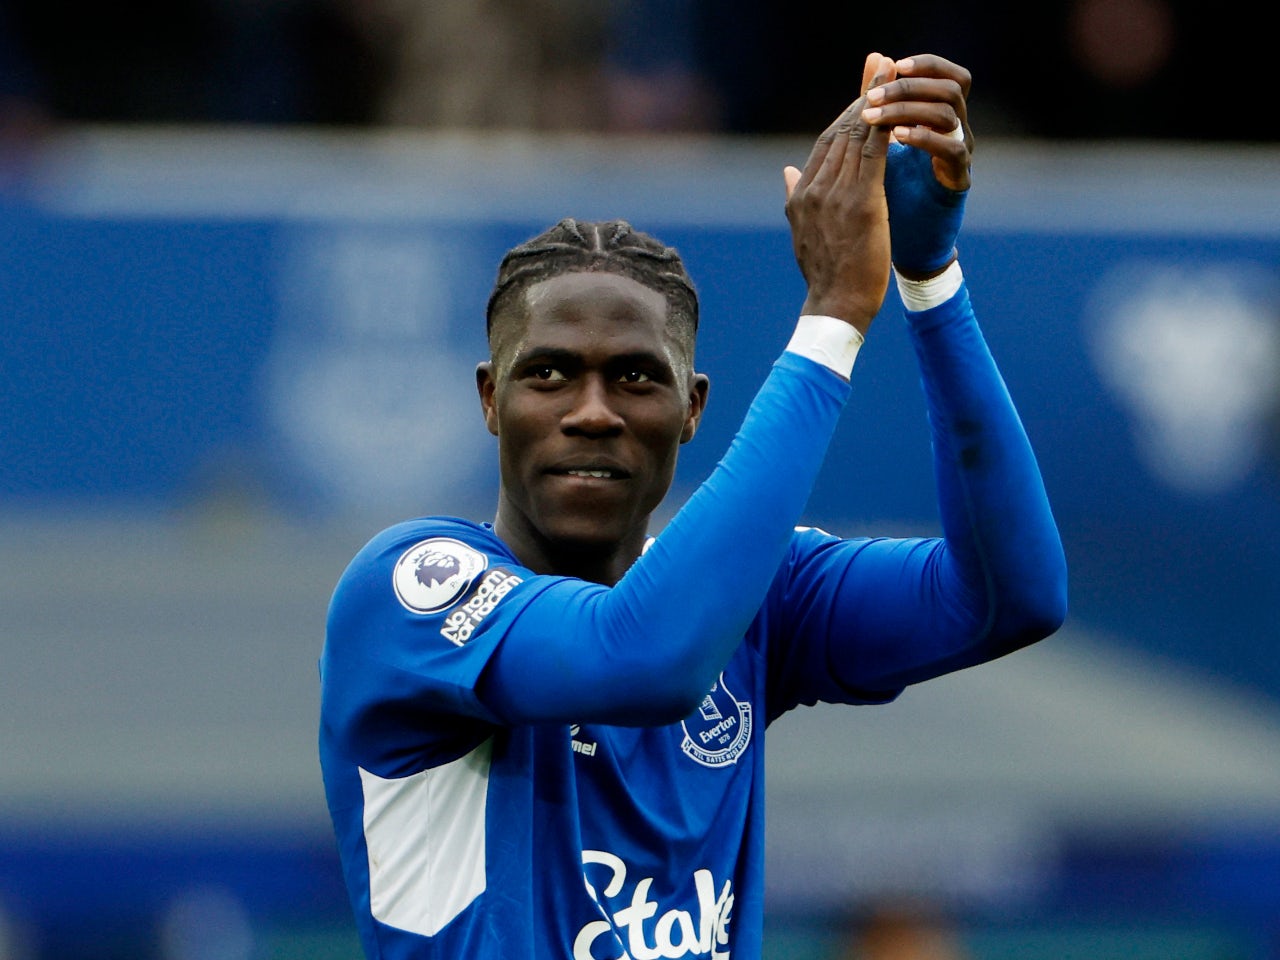 NEWS FLASH: Everton's £33m star's words could revive Man Utd pursuit, amid an intriguing Arsenal